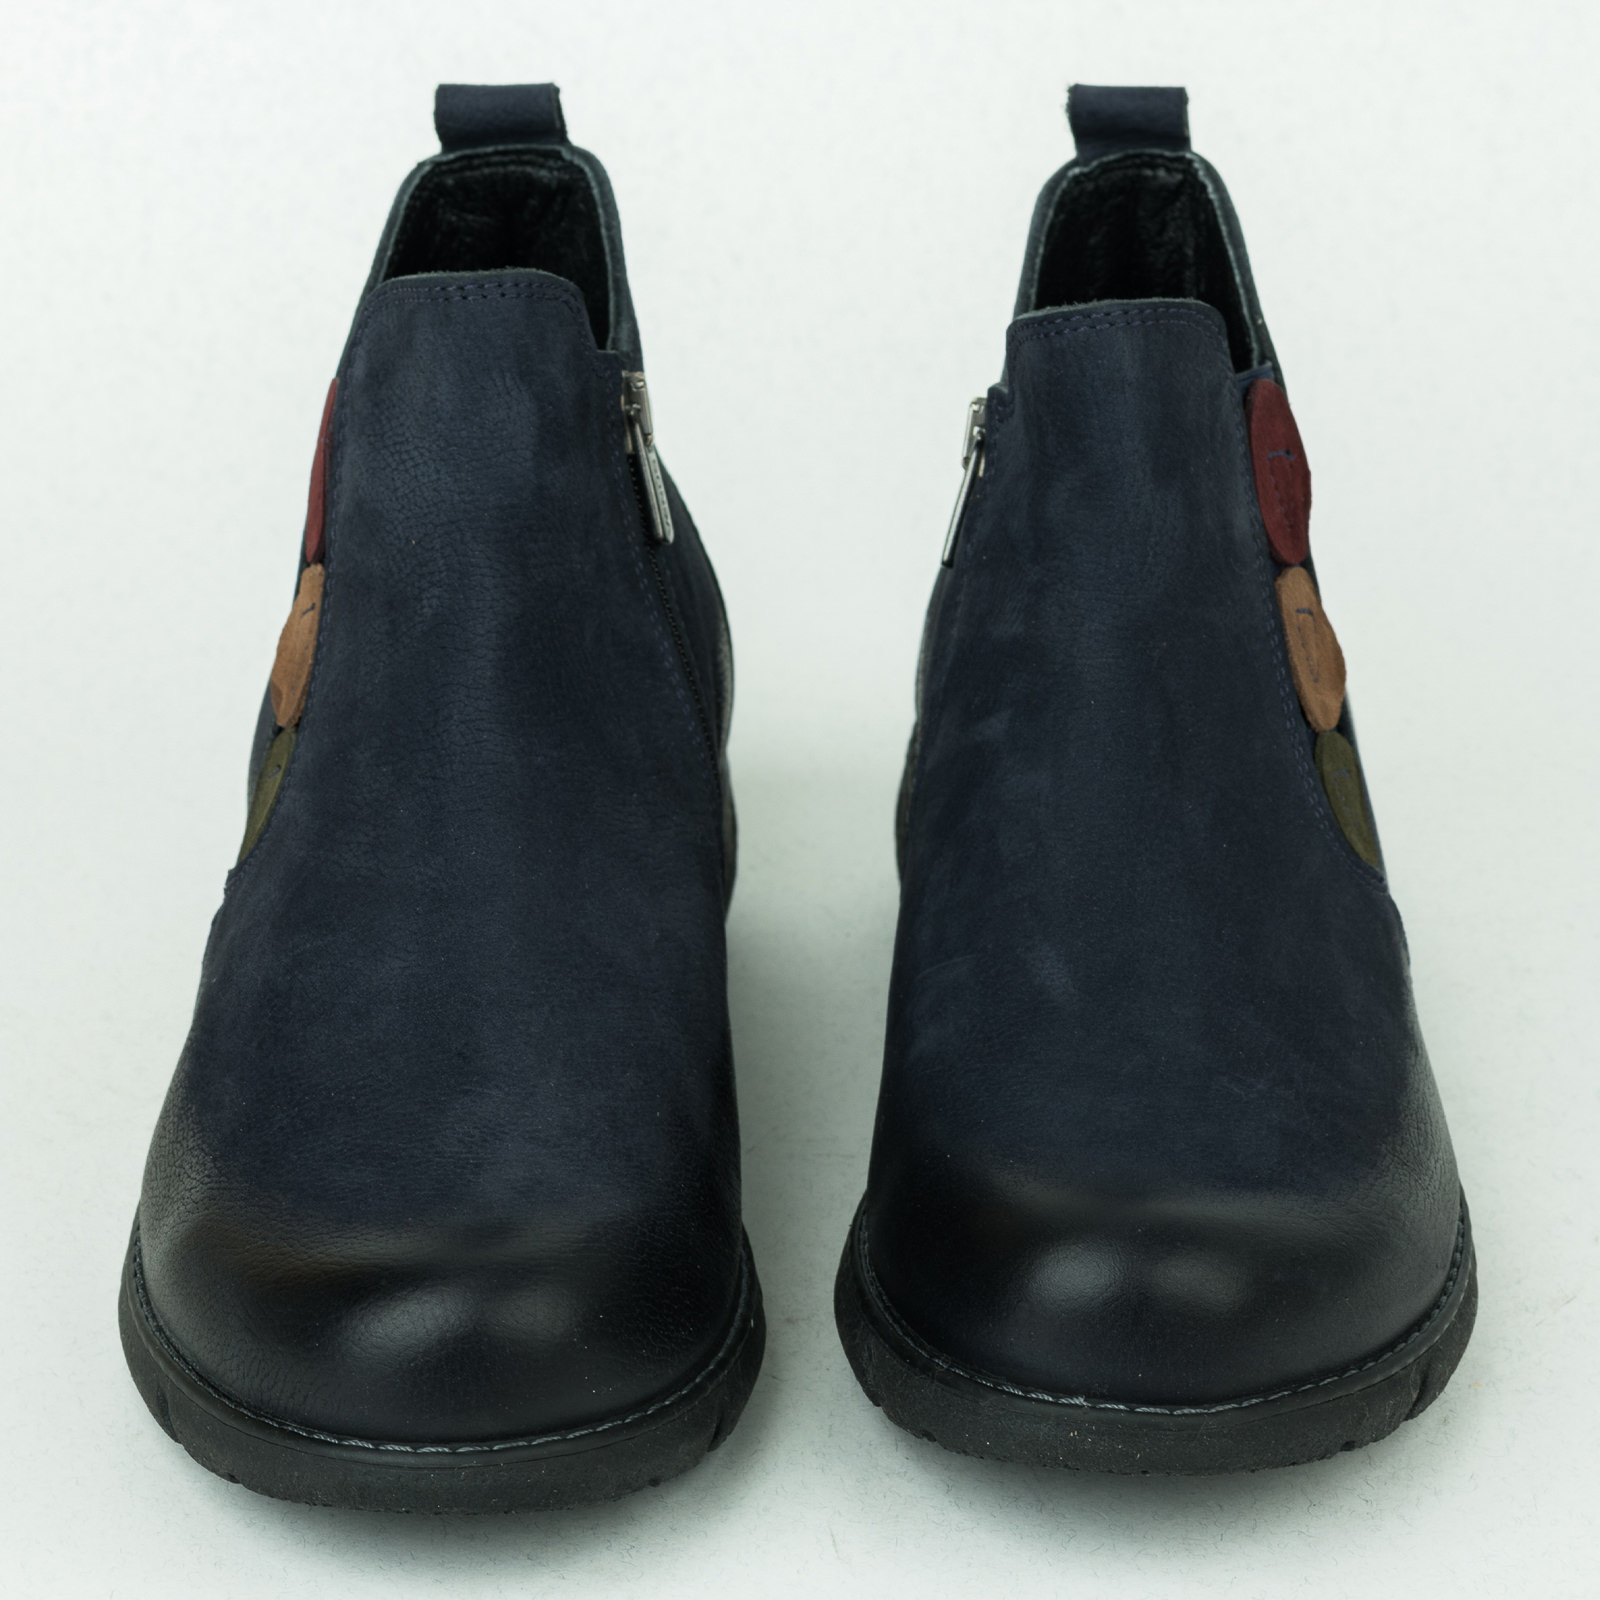 Leather ankle boots B070 - NAVY